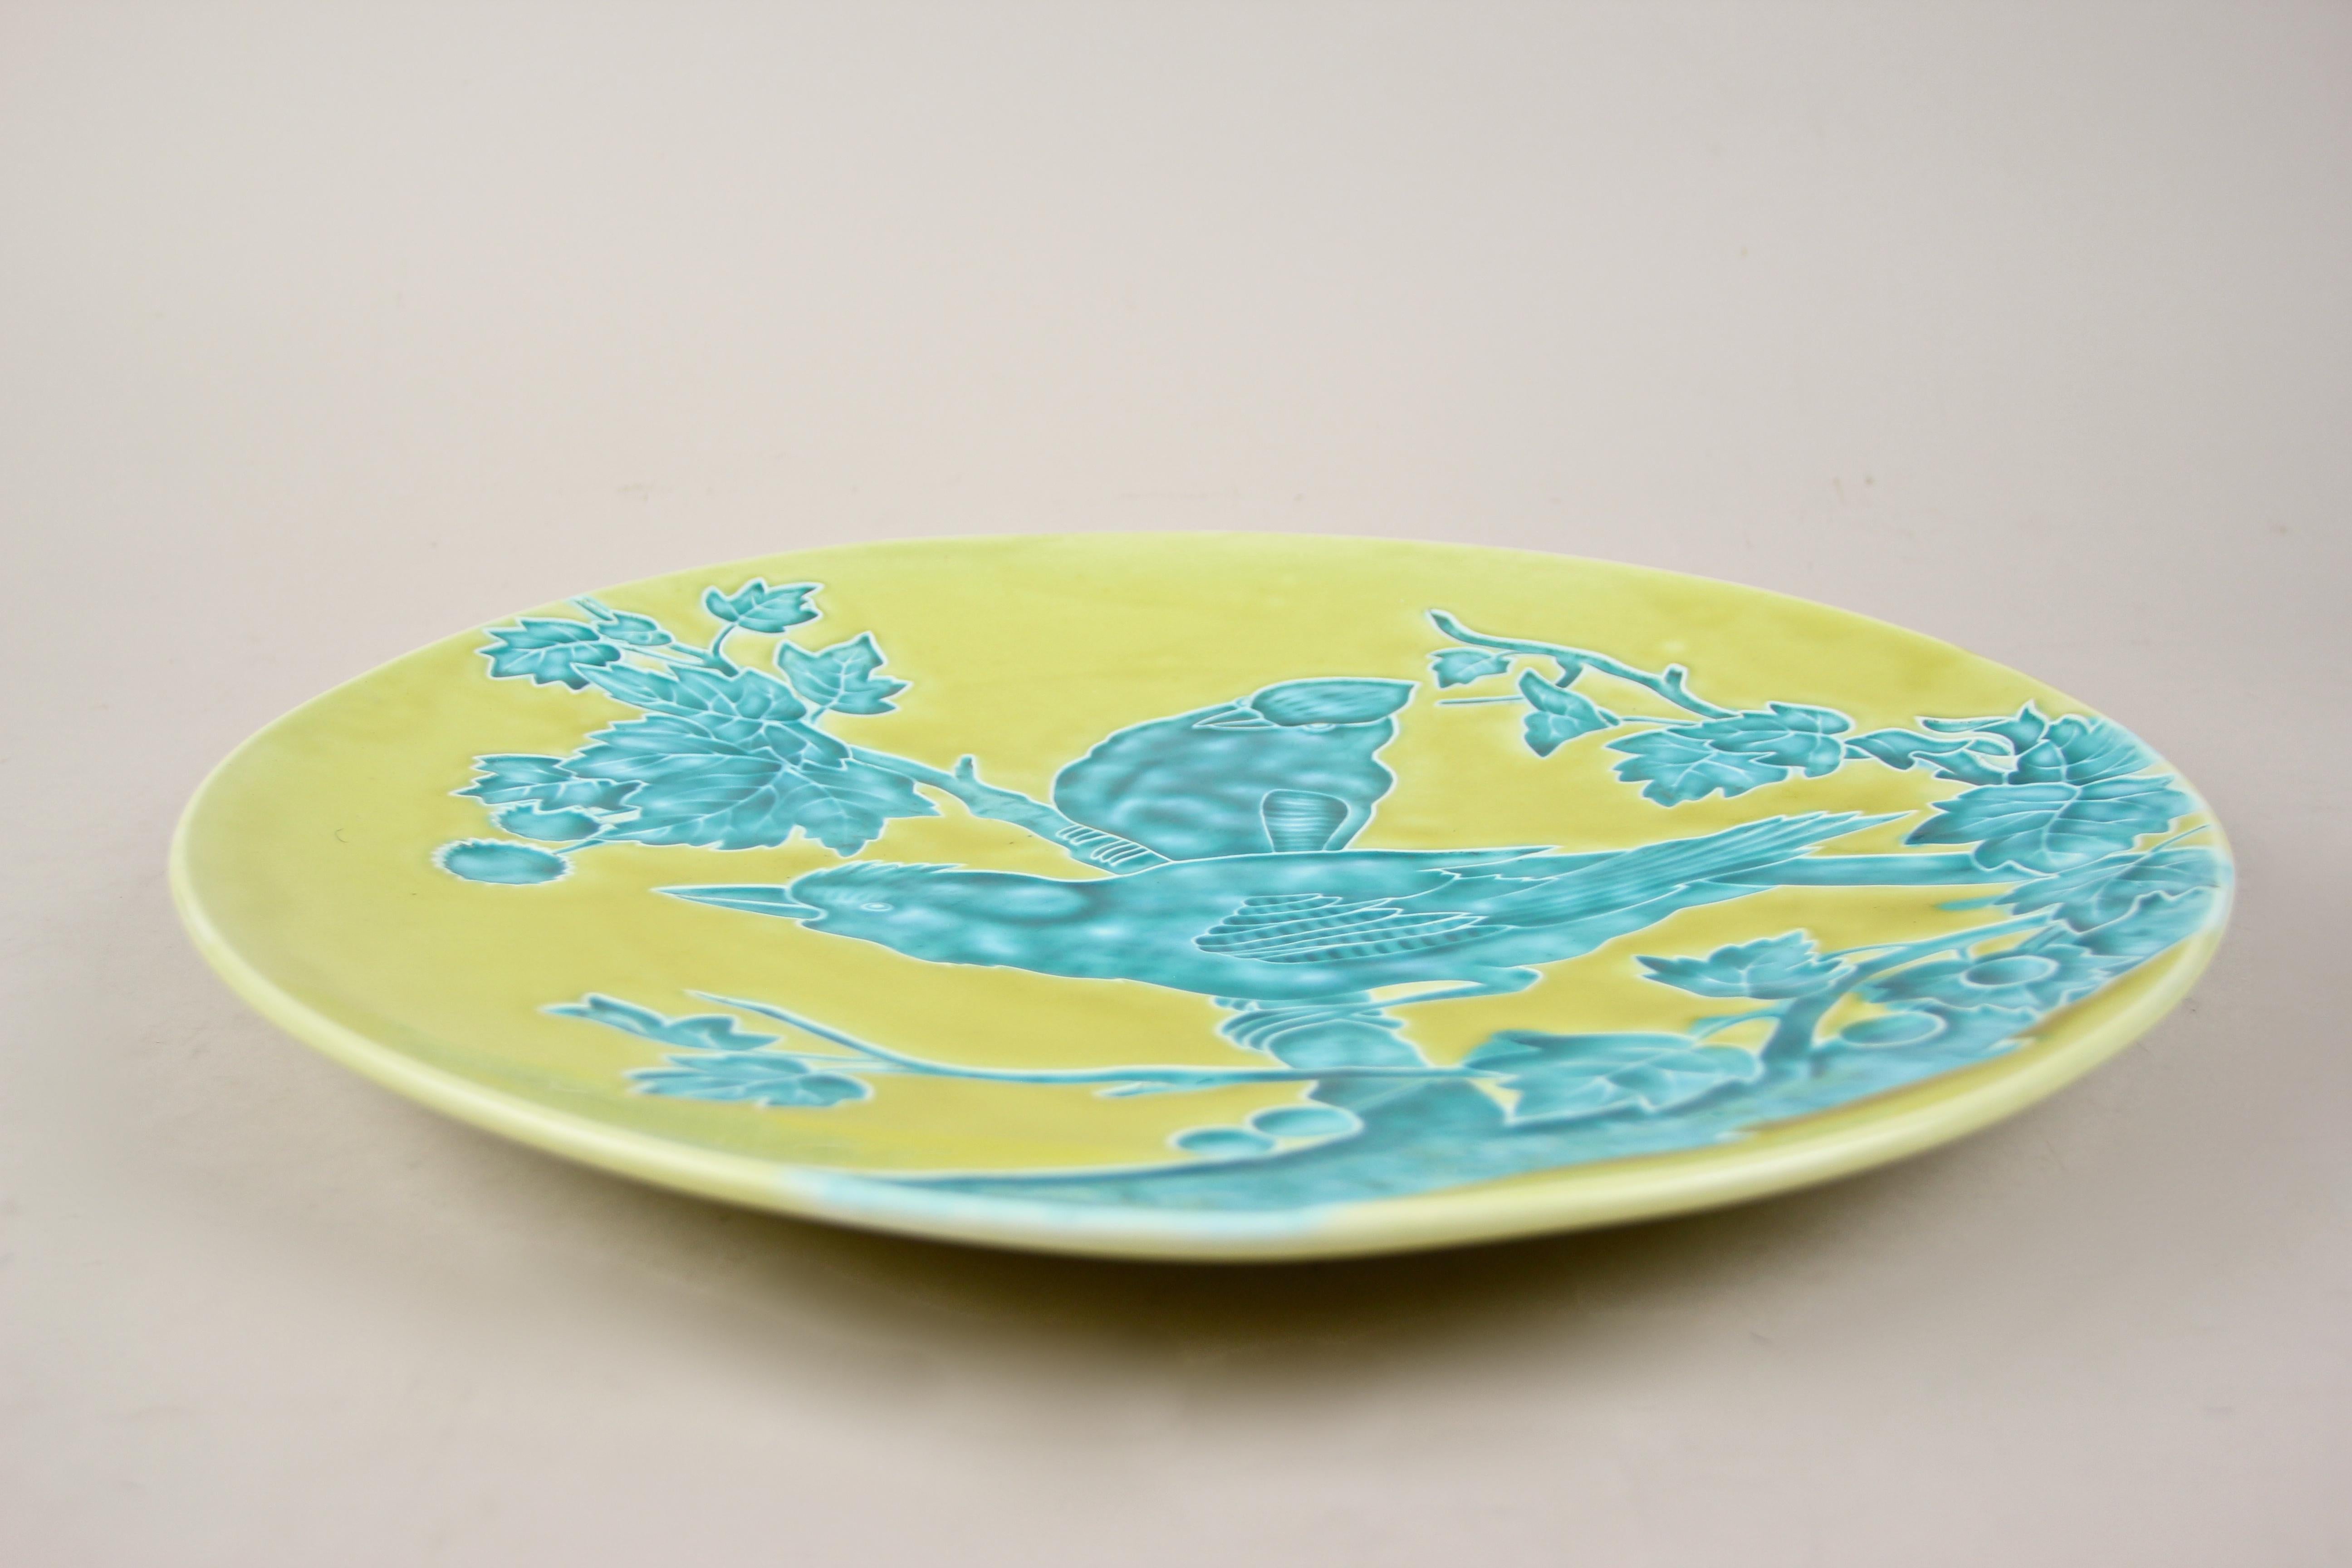 Exceptional Majolica wall plate from the famous company of Schuetz Cilli in Bohemia, circa 1910. This fancy large Majolica plate depicts two birds sitting on a tree branch with leaves. Colored in an amazing manner, a special turquoise tone, it